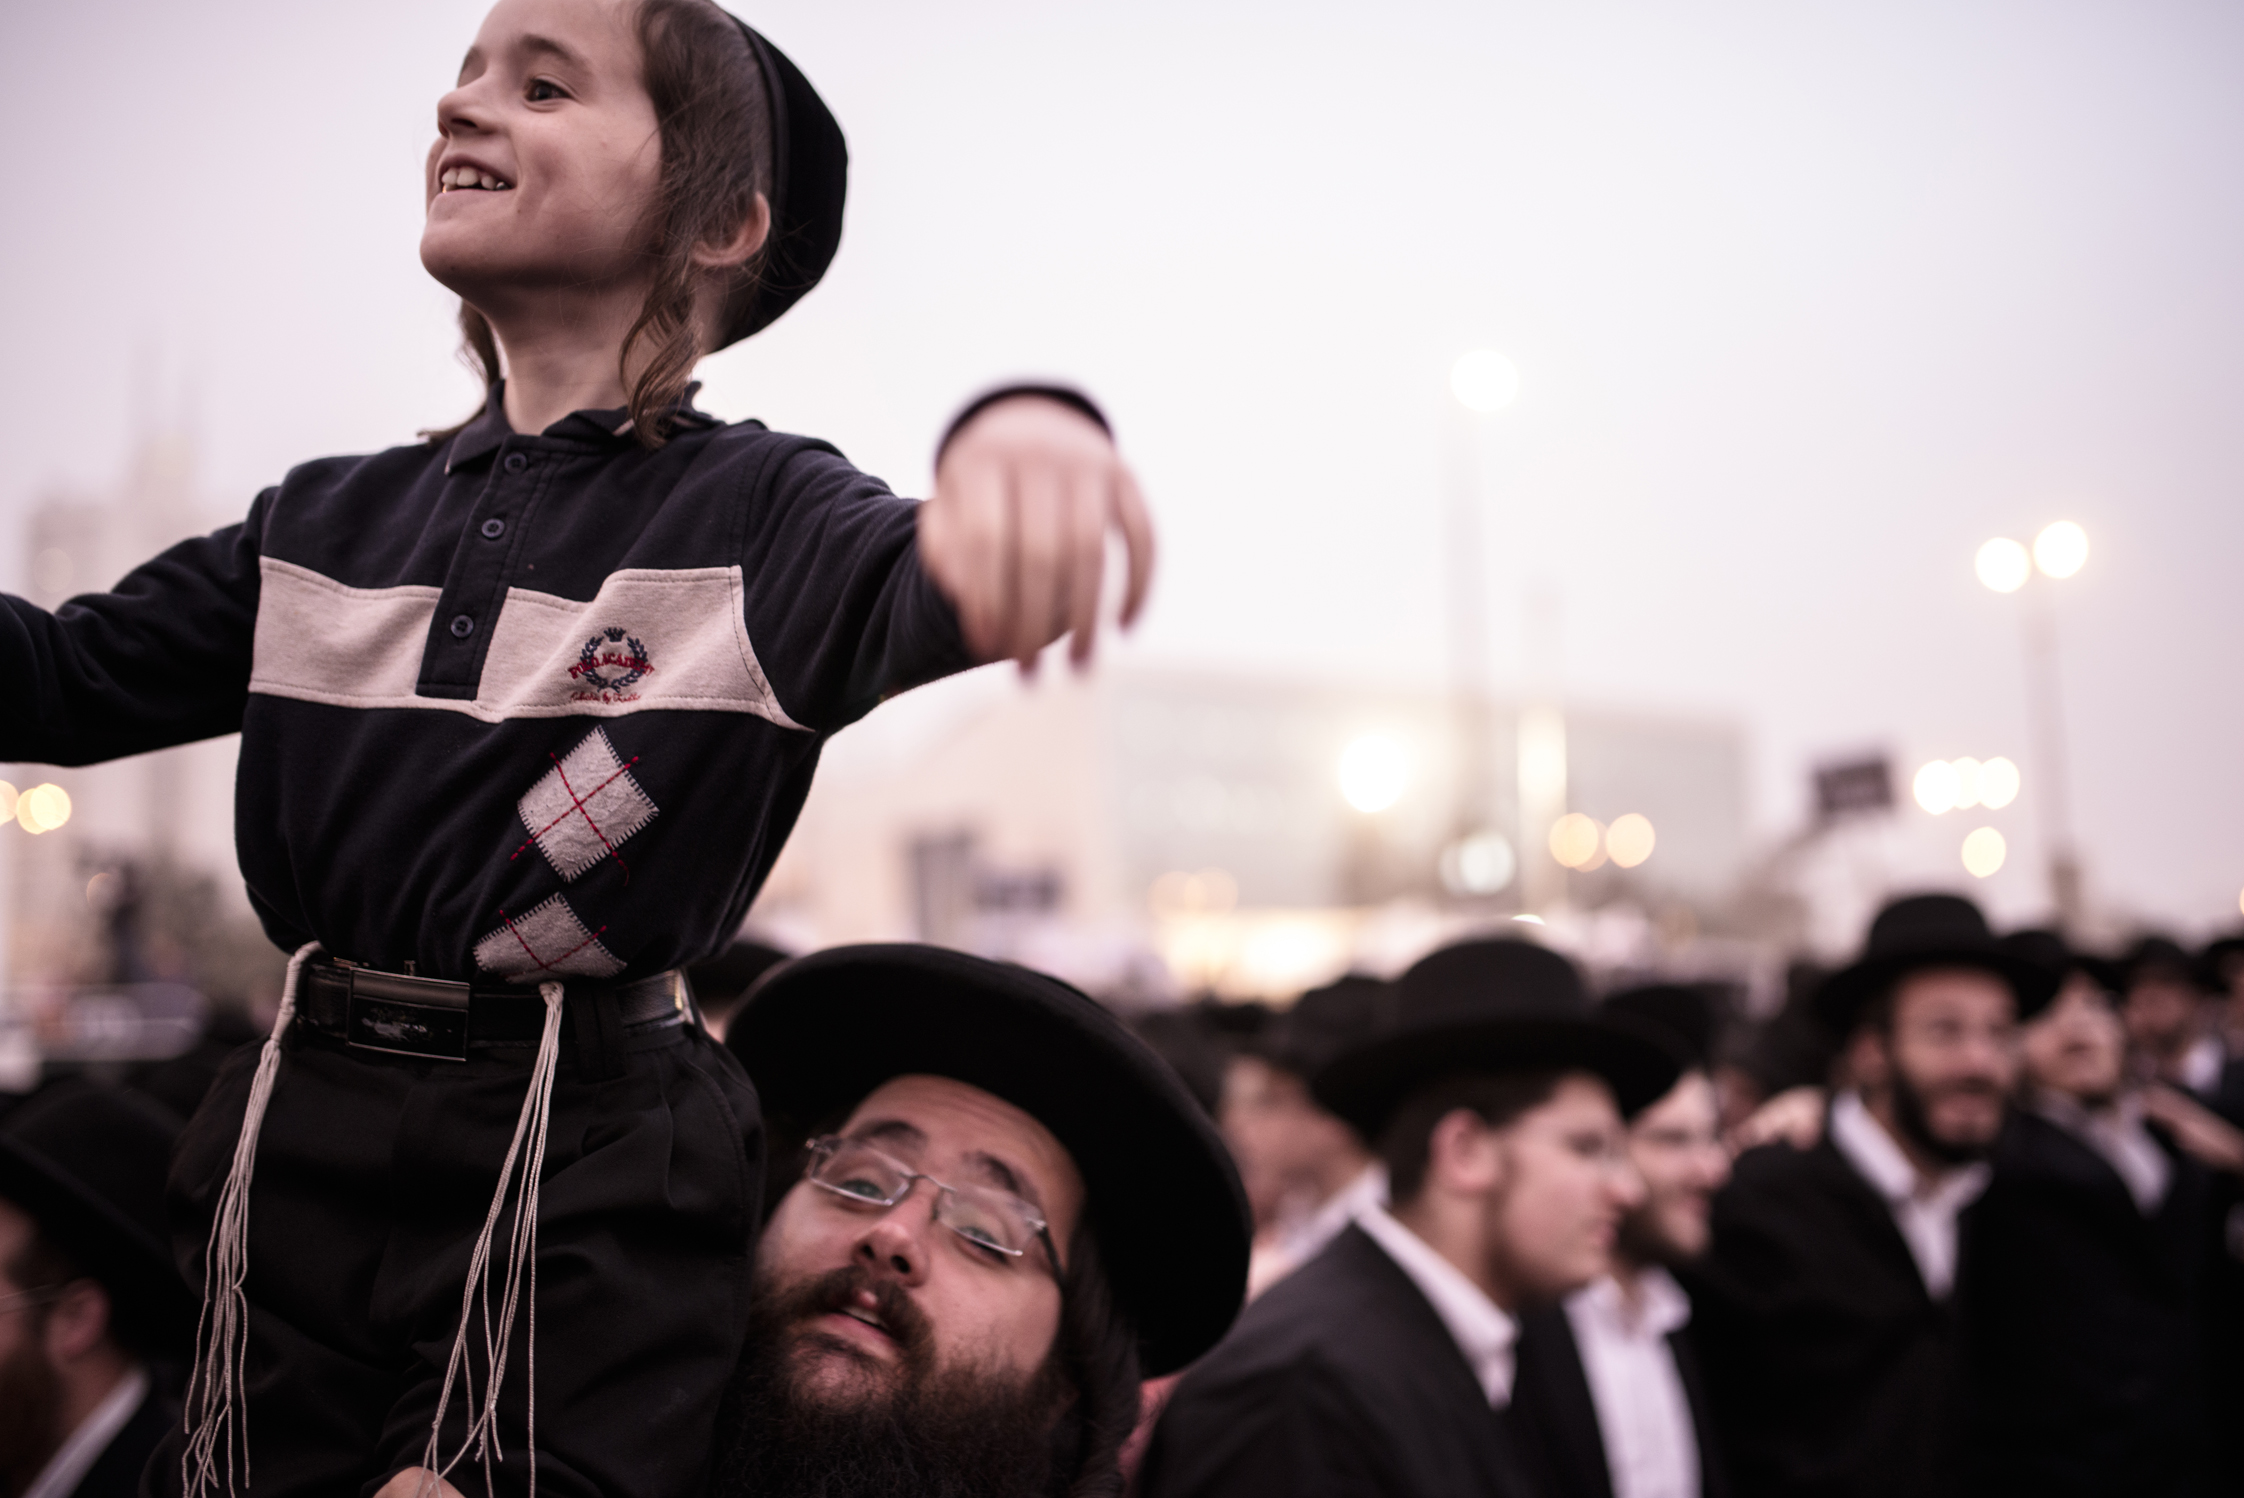 A father lifts his son as hundreds of thousands of Ultra Orthodox Jews demonstrate in Jerusalem against any plans to make them undergo military service. The protests were sparked by cuts in government funding to Jewish theological seminaries, or yeshivas, and a planned crackdown on young ultra-Orthodox men seeking to avoid Israel's compulsory military draft. The picture was taken in Jerusalem, Israel, 2nd Mar 2014.